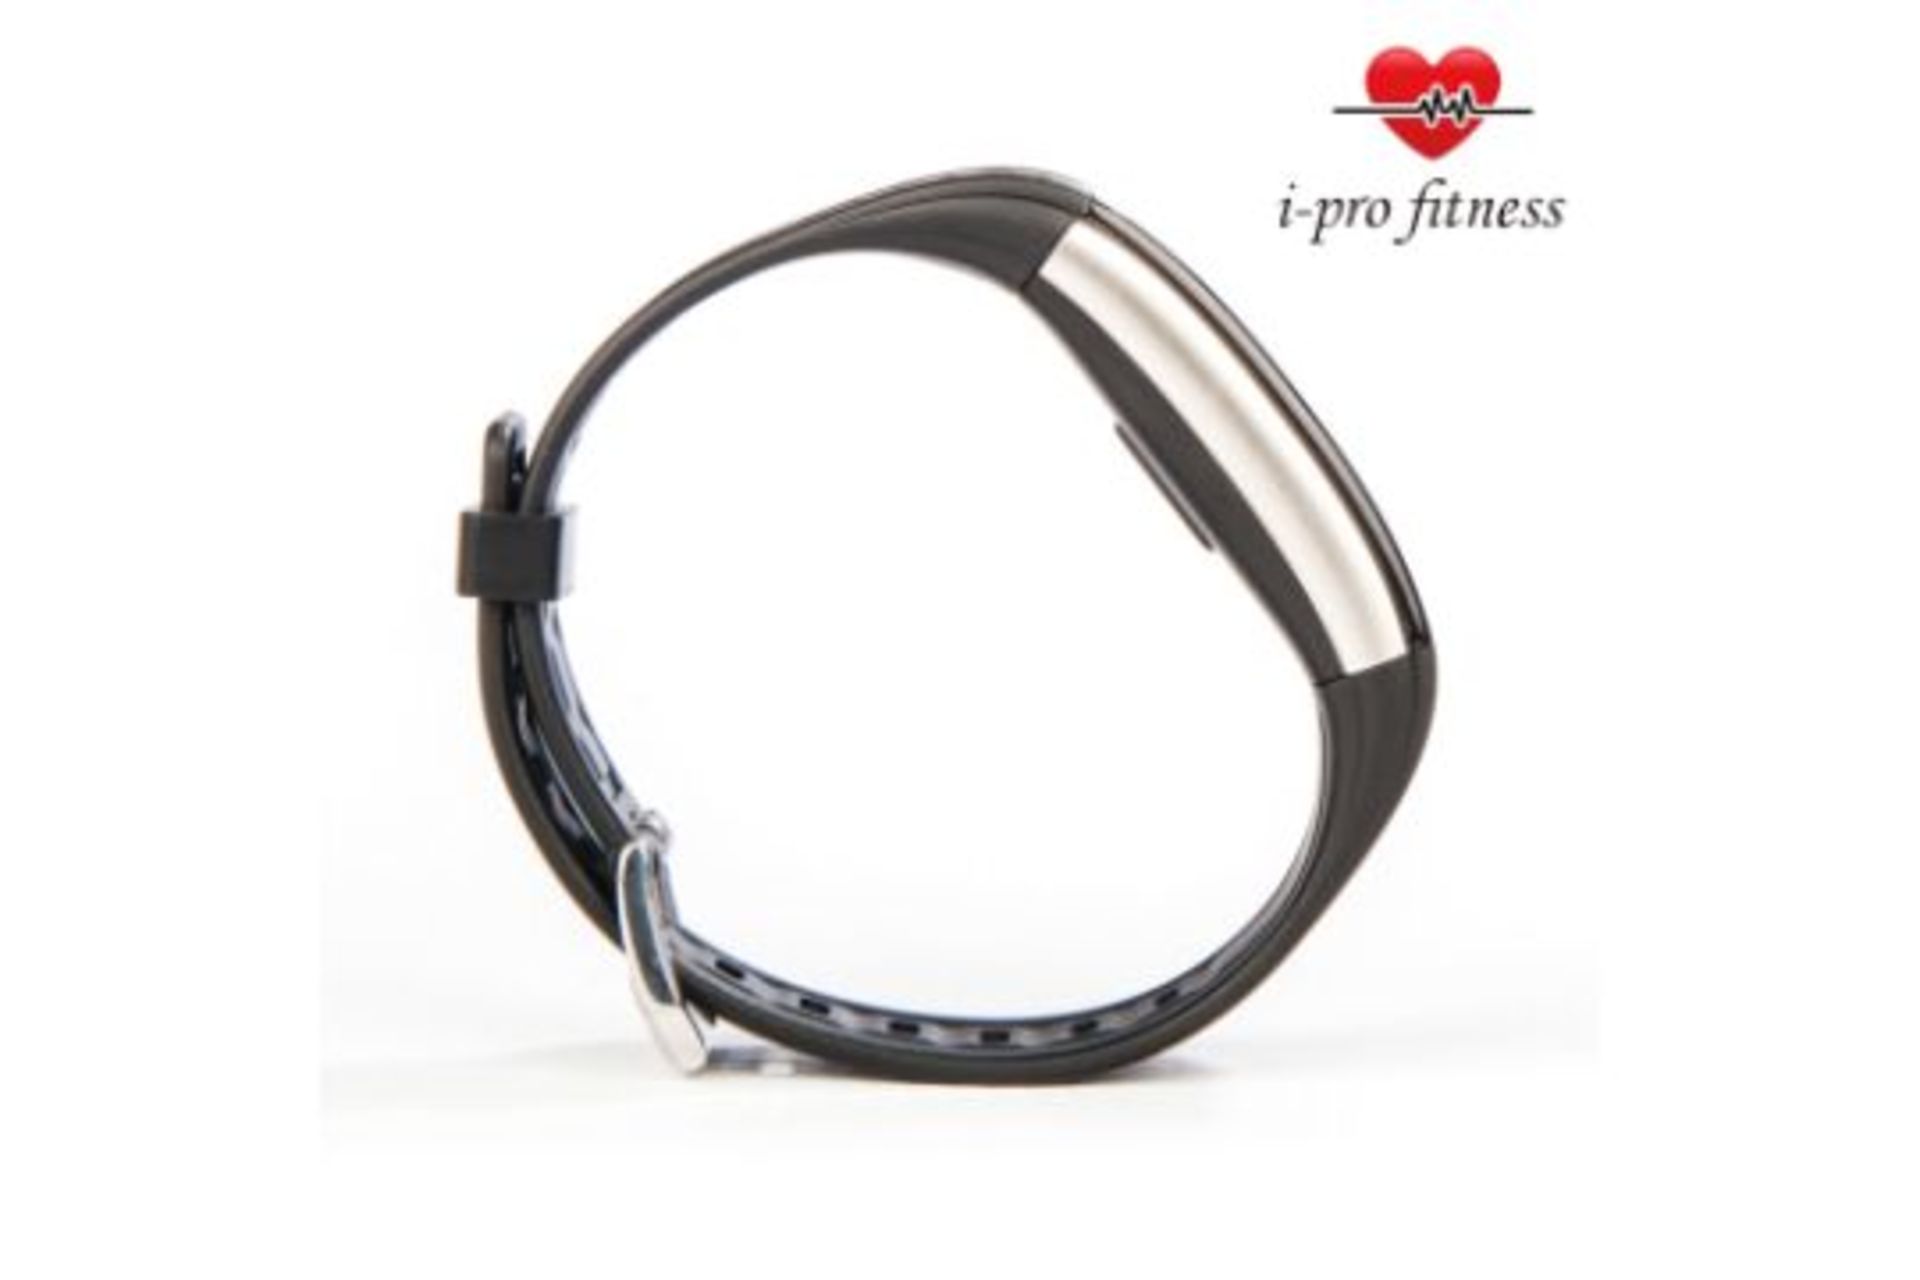 I-Pro S2 Waterproof Fitness Tracker With Heart Rate Monitor - Image 2 of 7